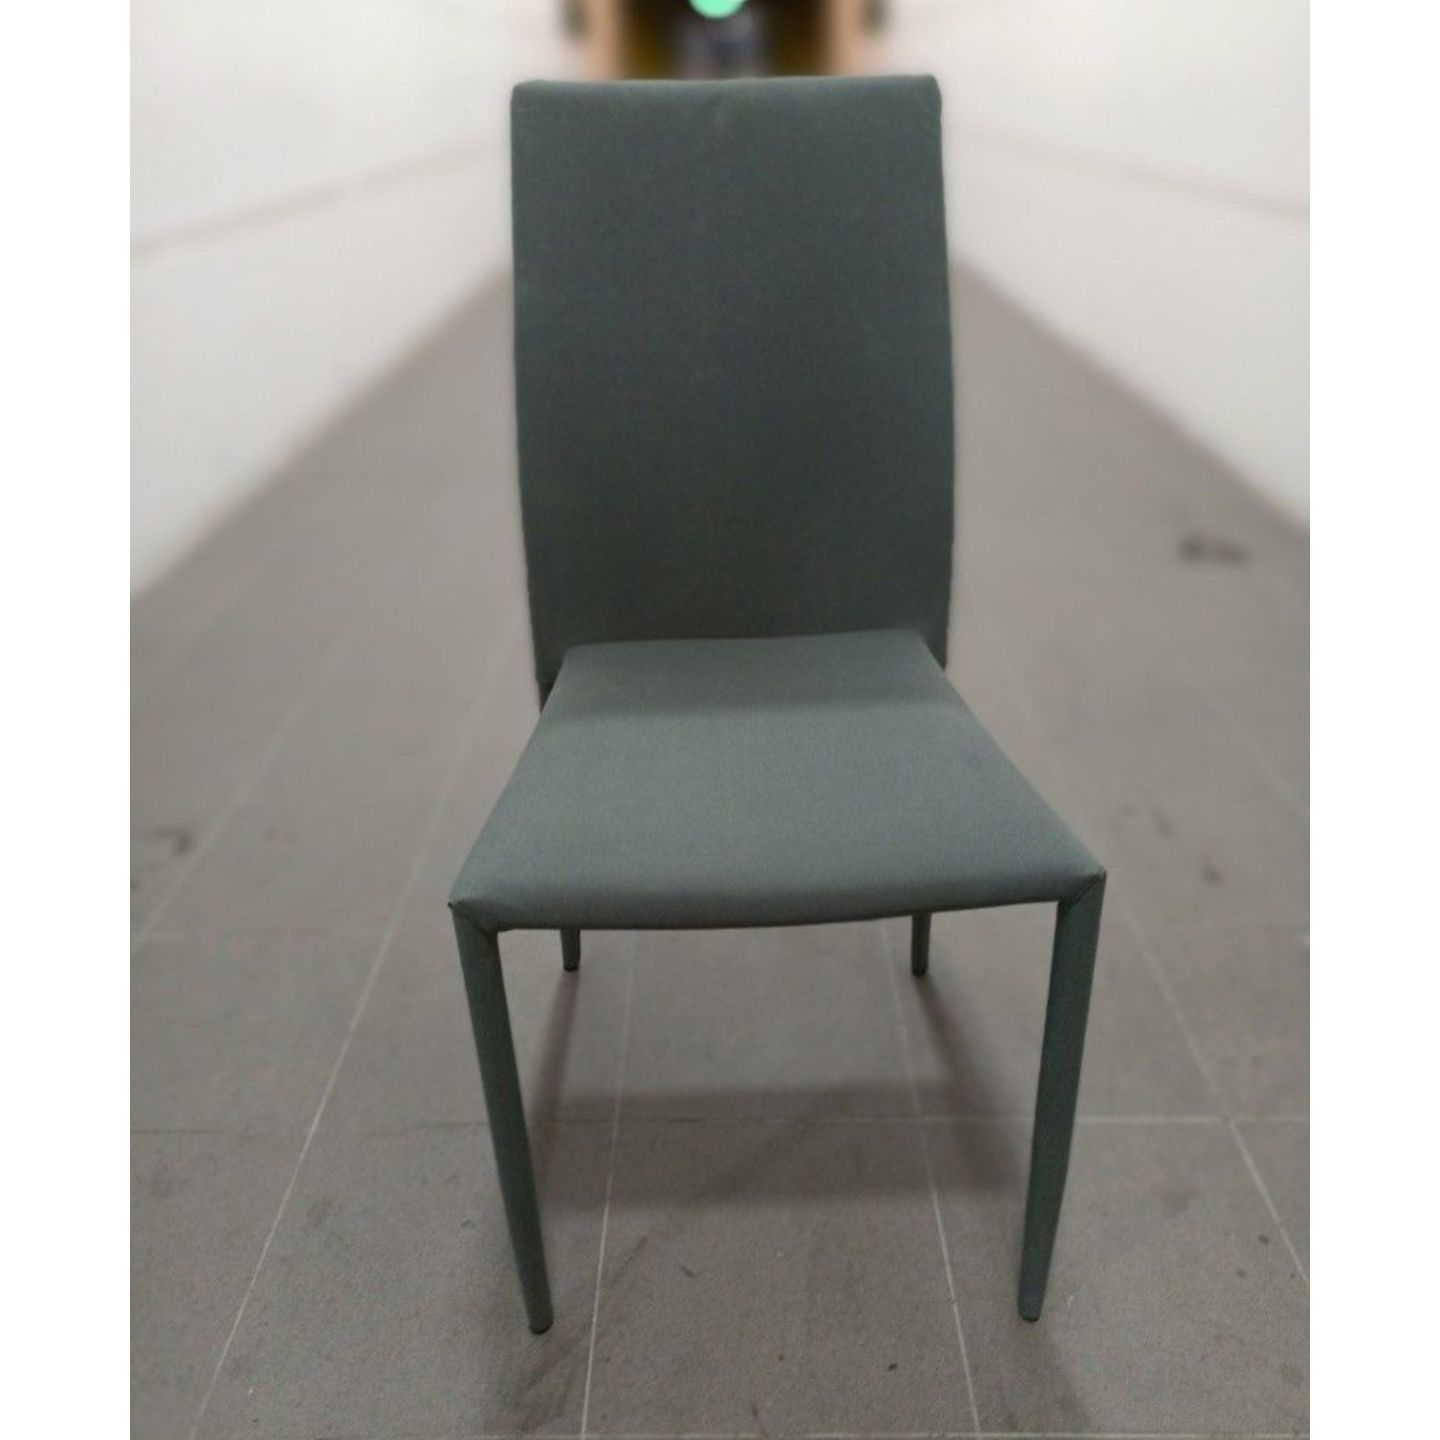 FIRE SALE - GLASSON Dining Chair in LIGHT GREY - ONE ONLY